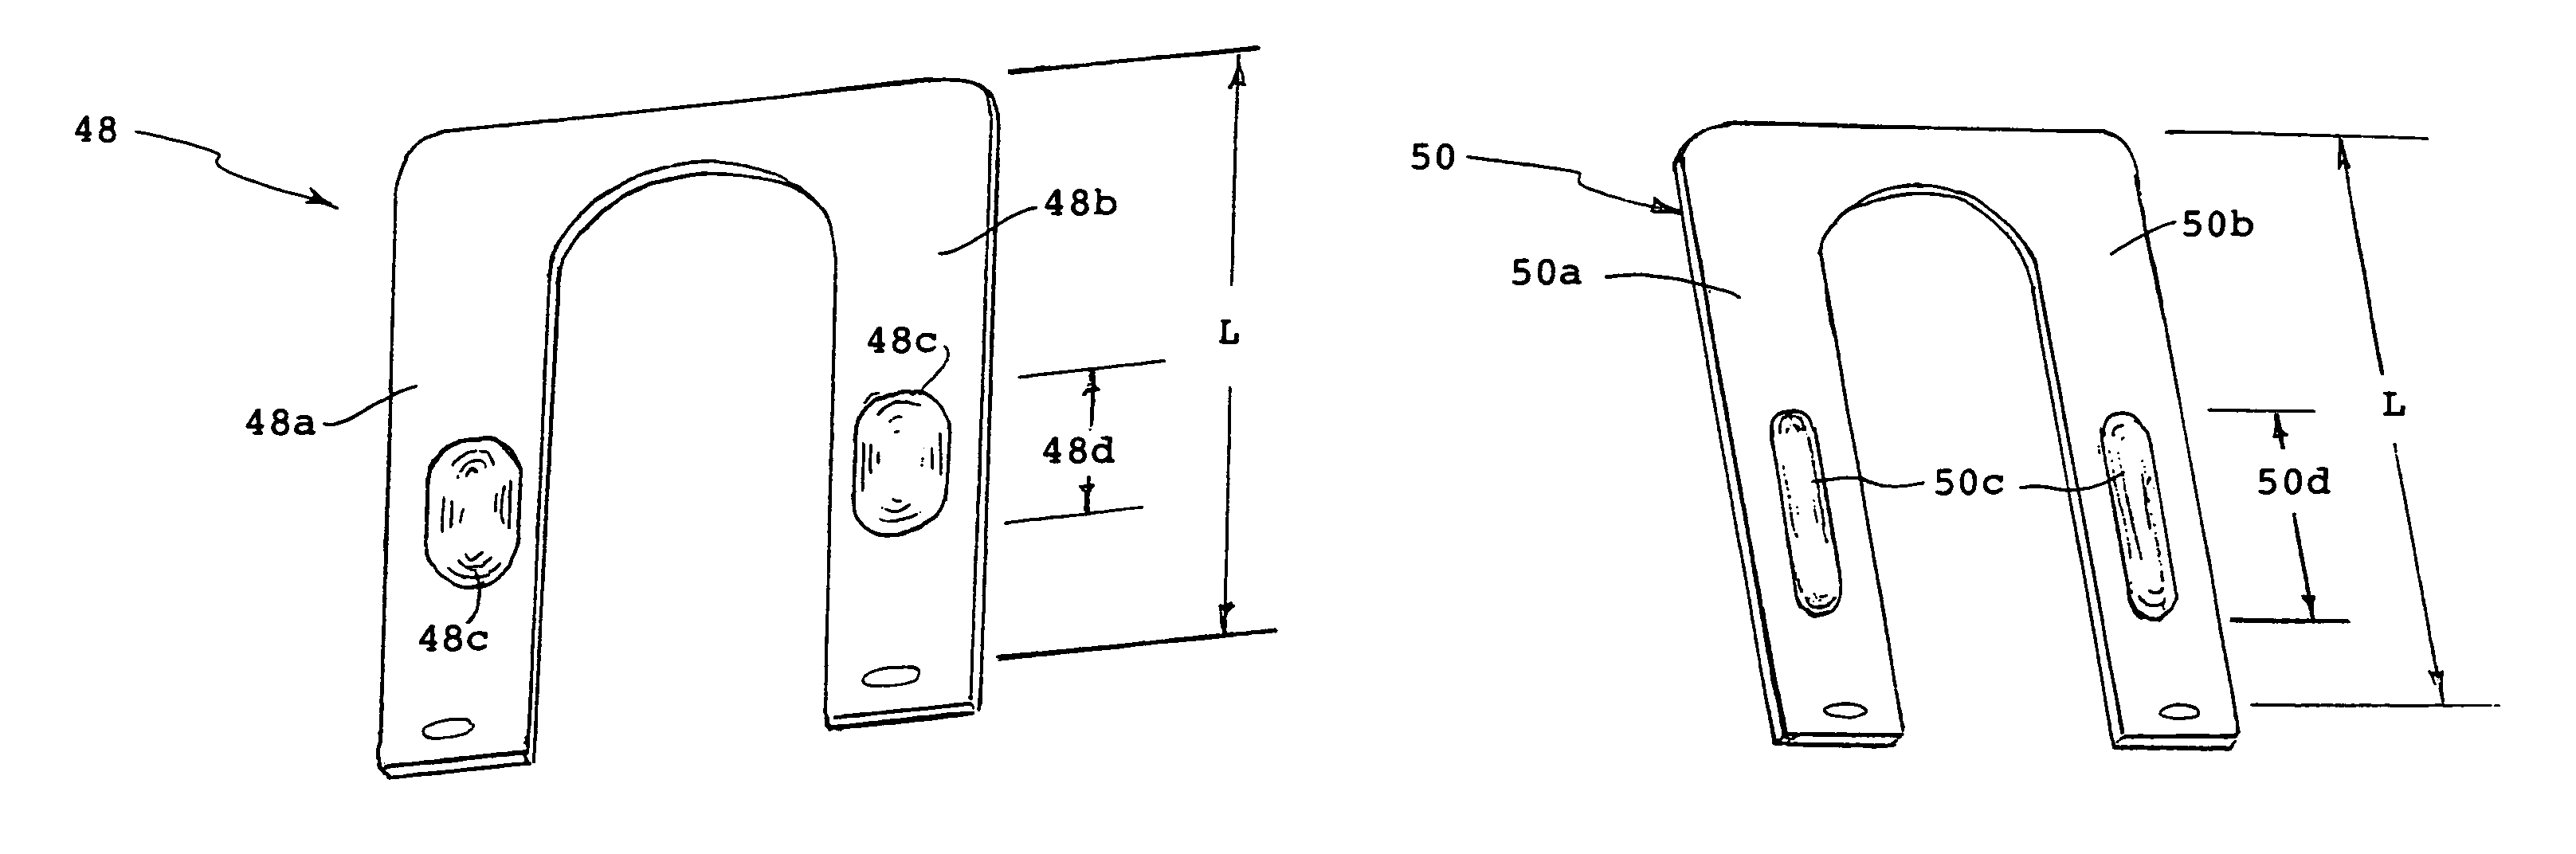 Method for ambient temperature compensating thermostat metal actuated electrical devices having a plurality of current ratings